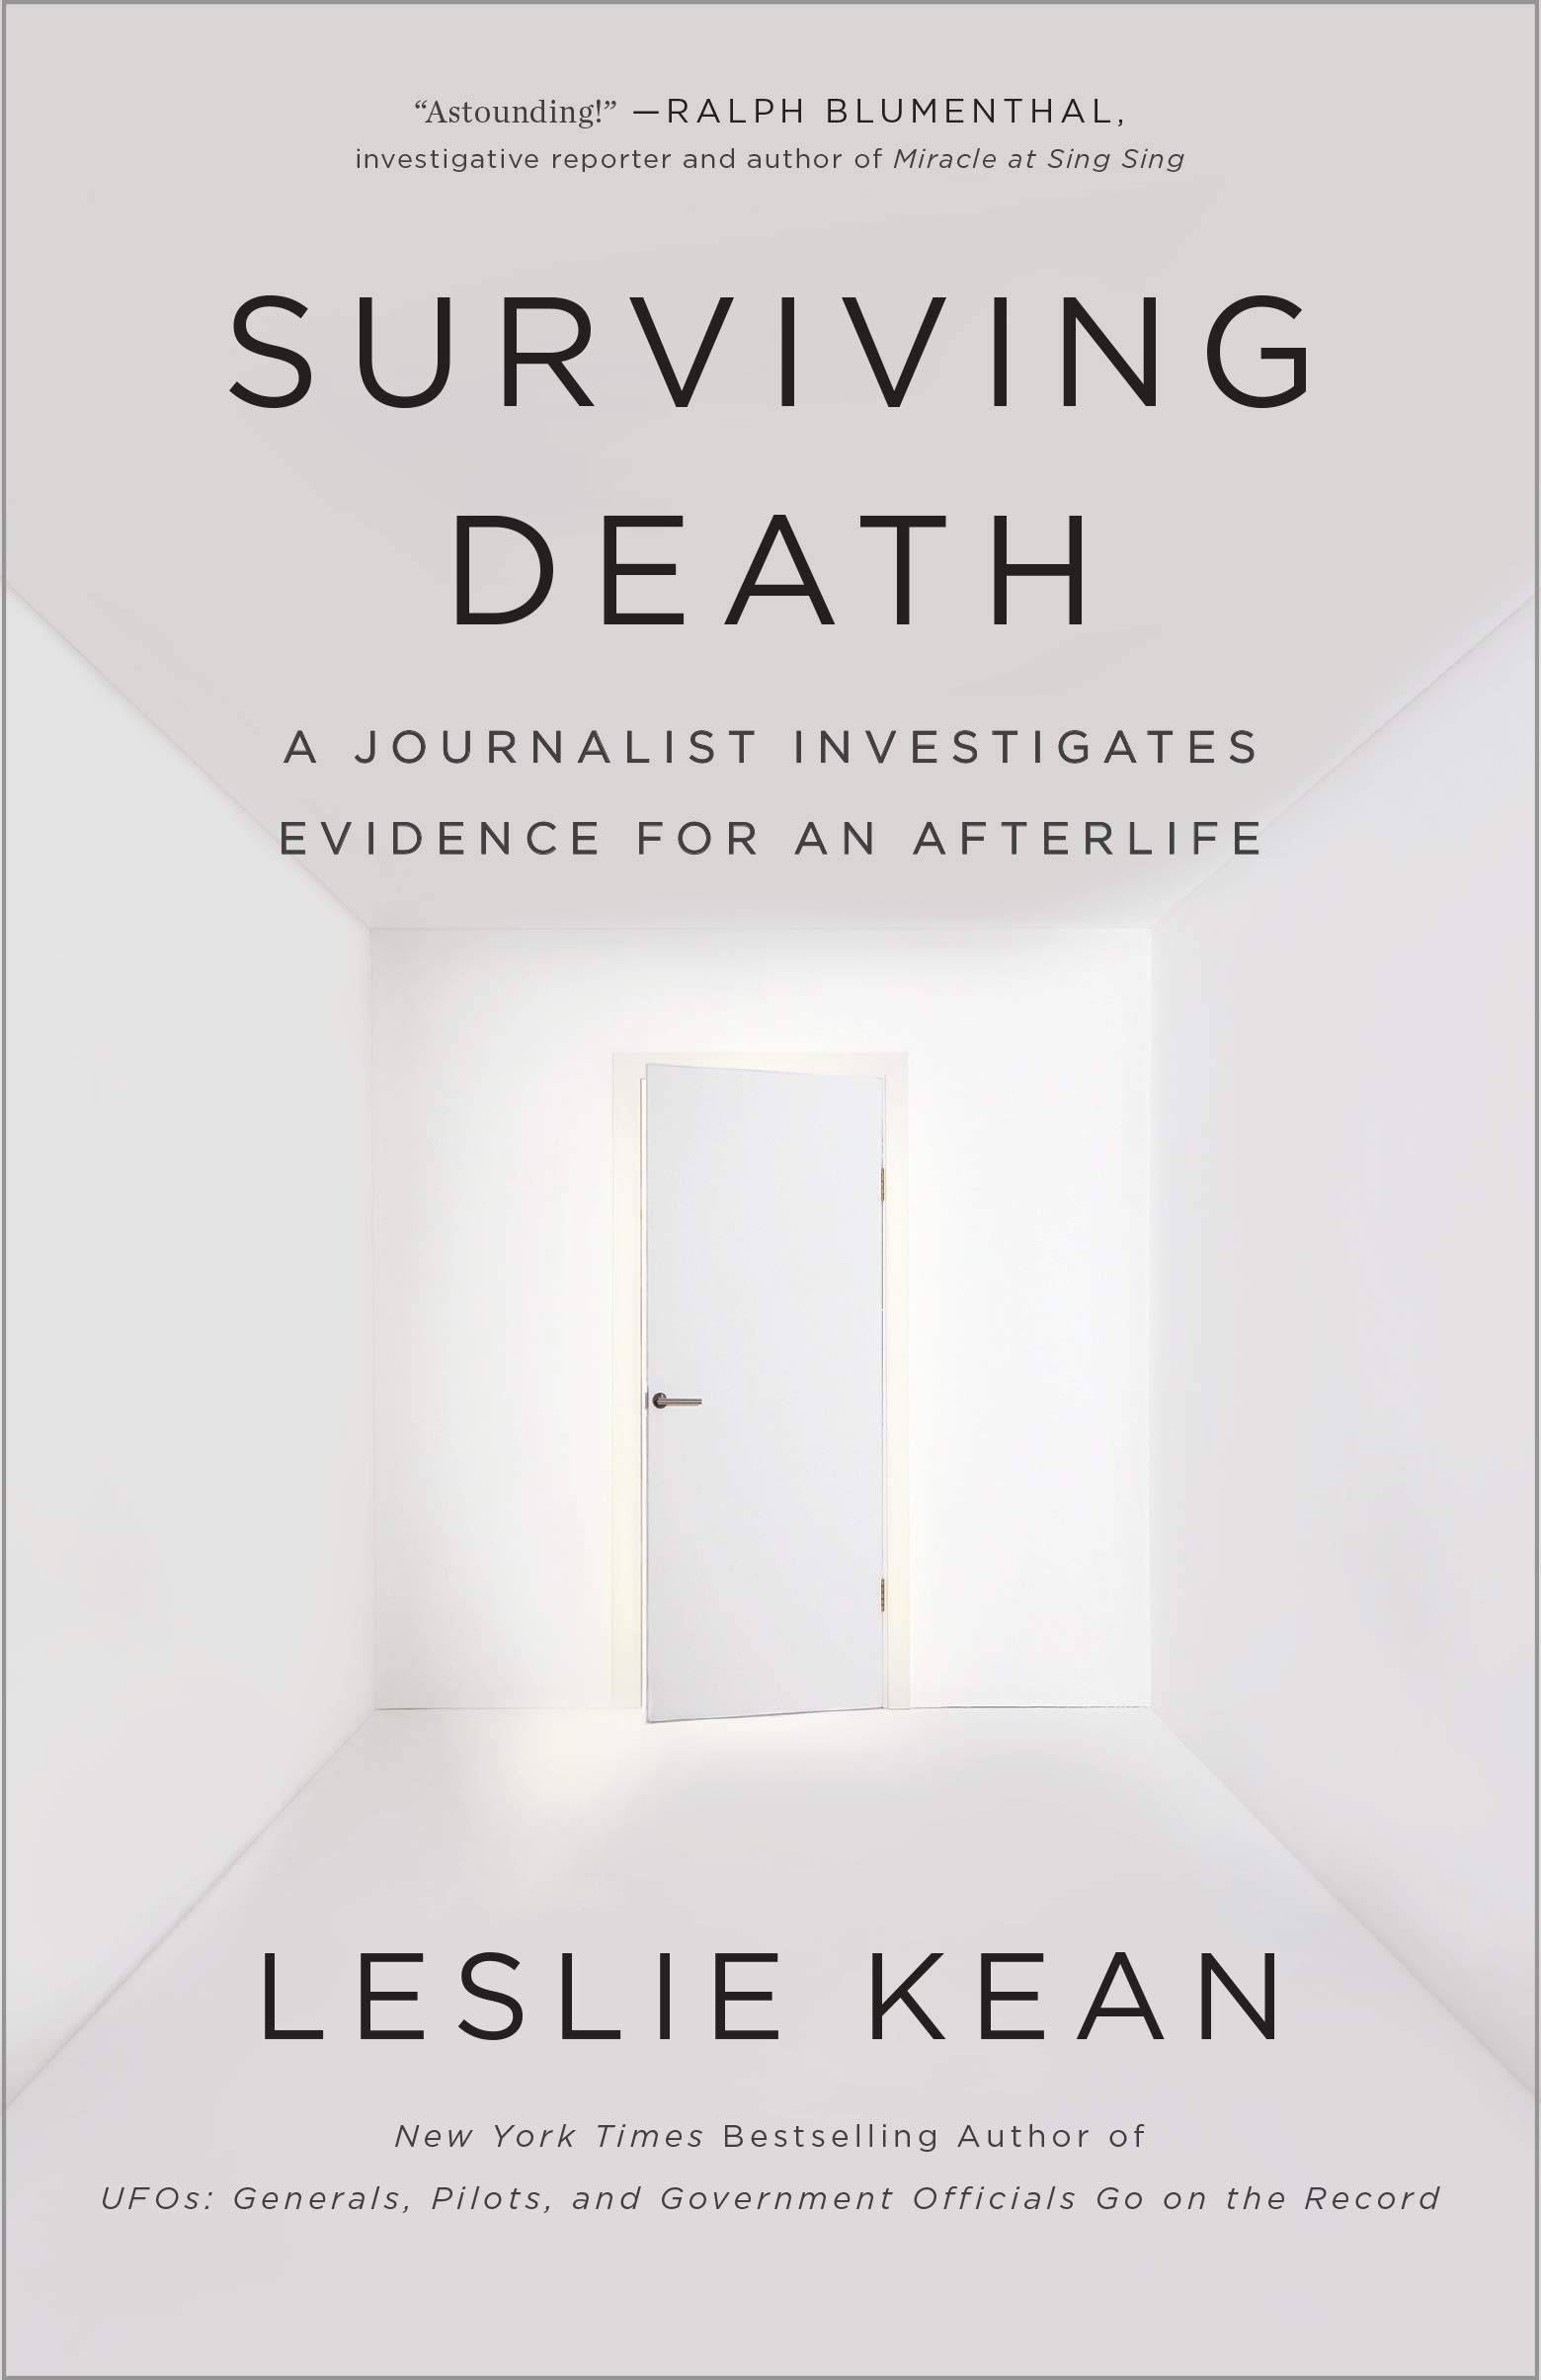 Surviving Death: A Journalist Investigates Evidence for an Afterlife, by Leslie Kean - Near-Death Experience (NDE) Books - NDE Book Reviews on Survival.ark.au